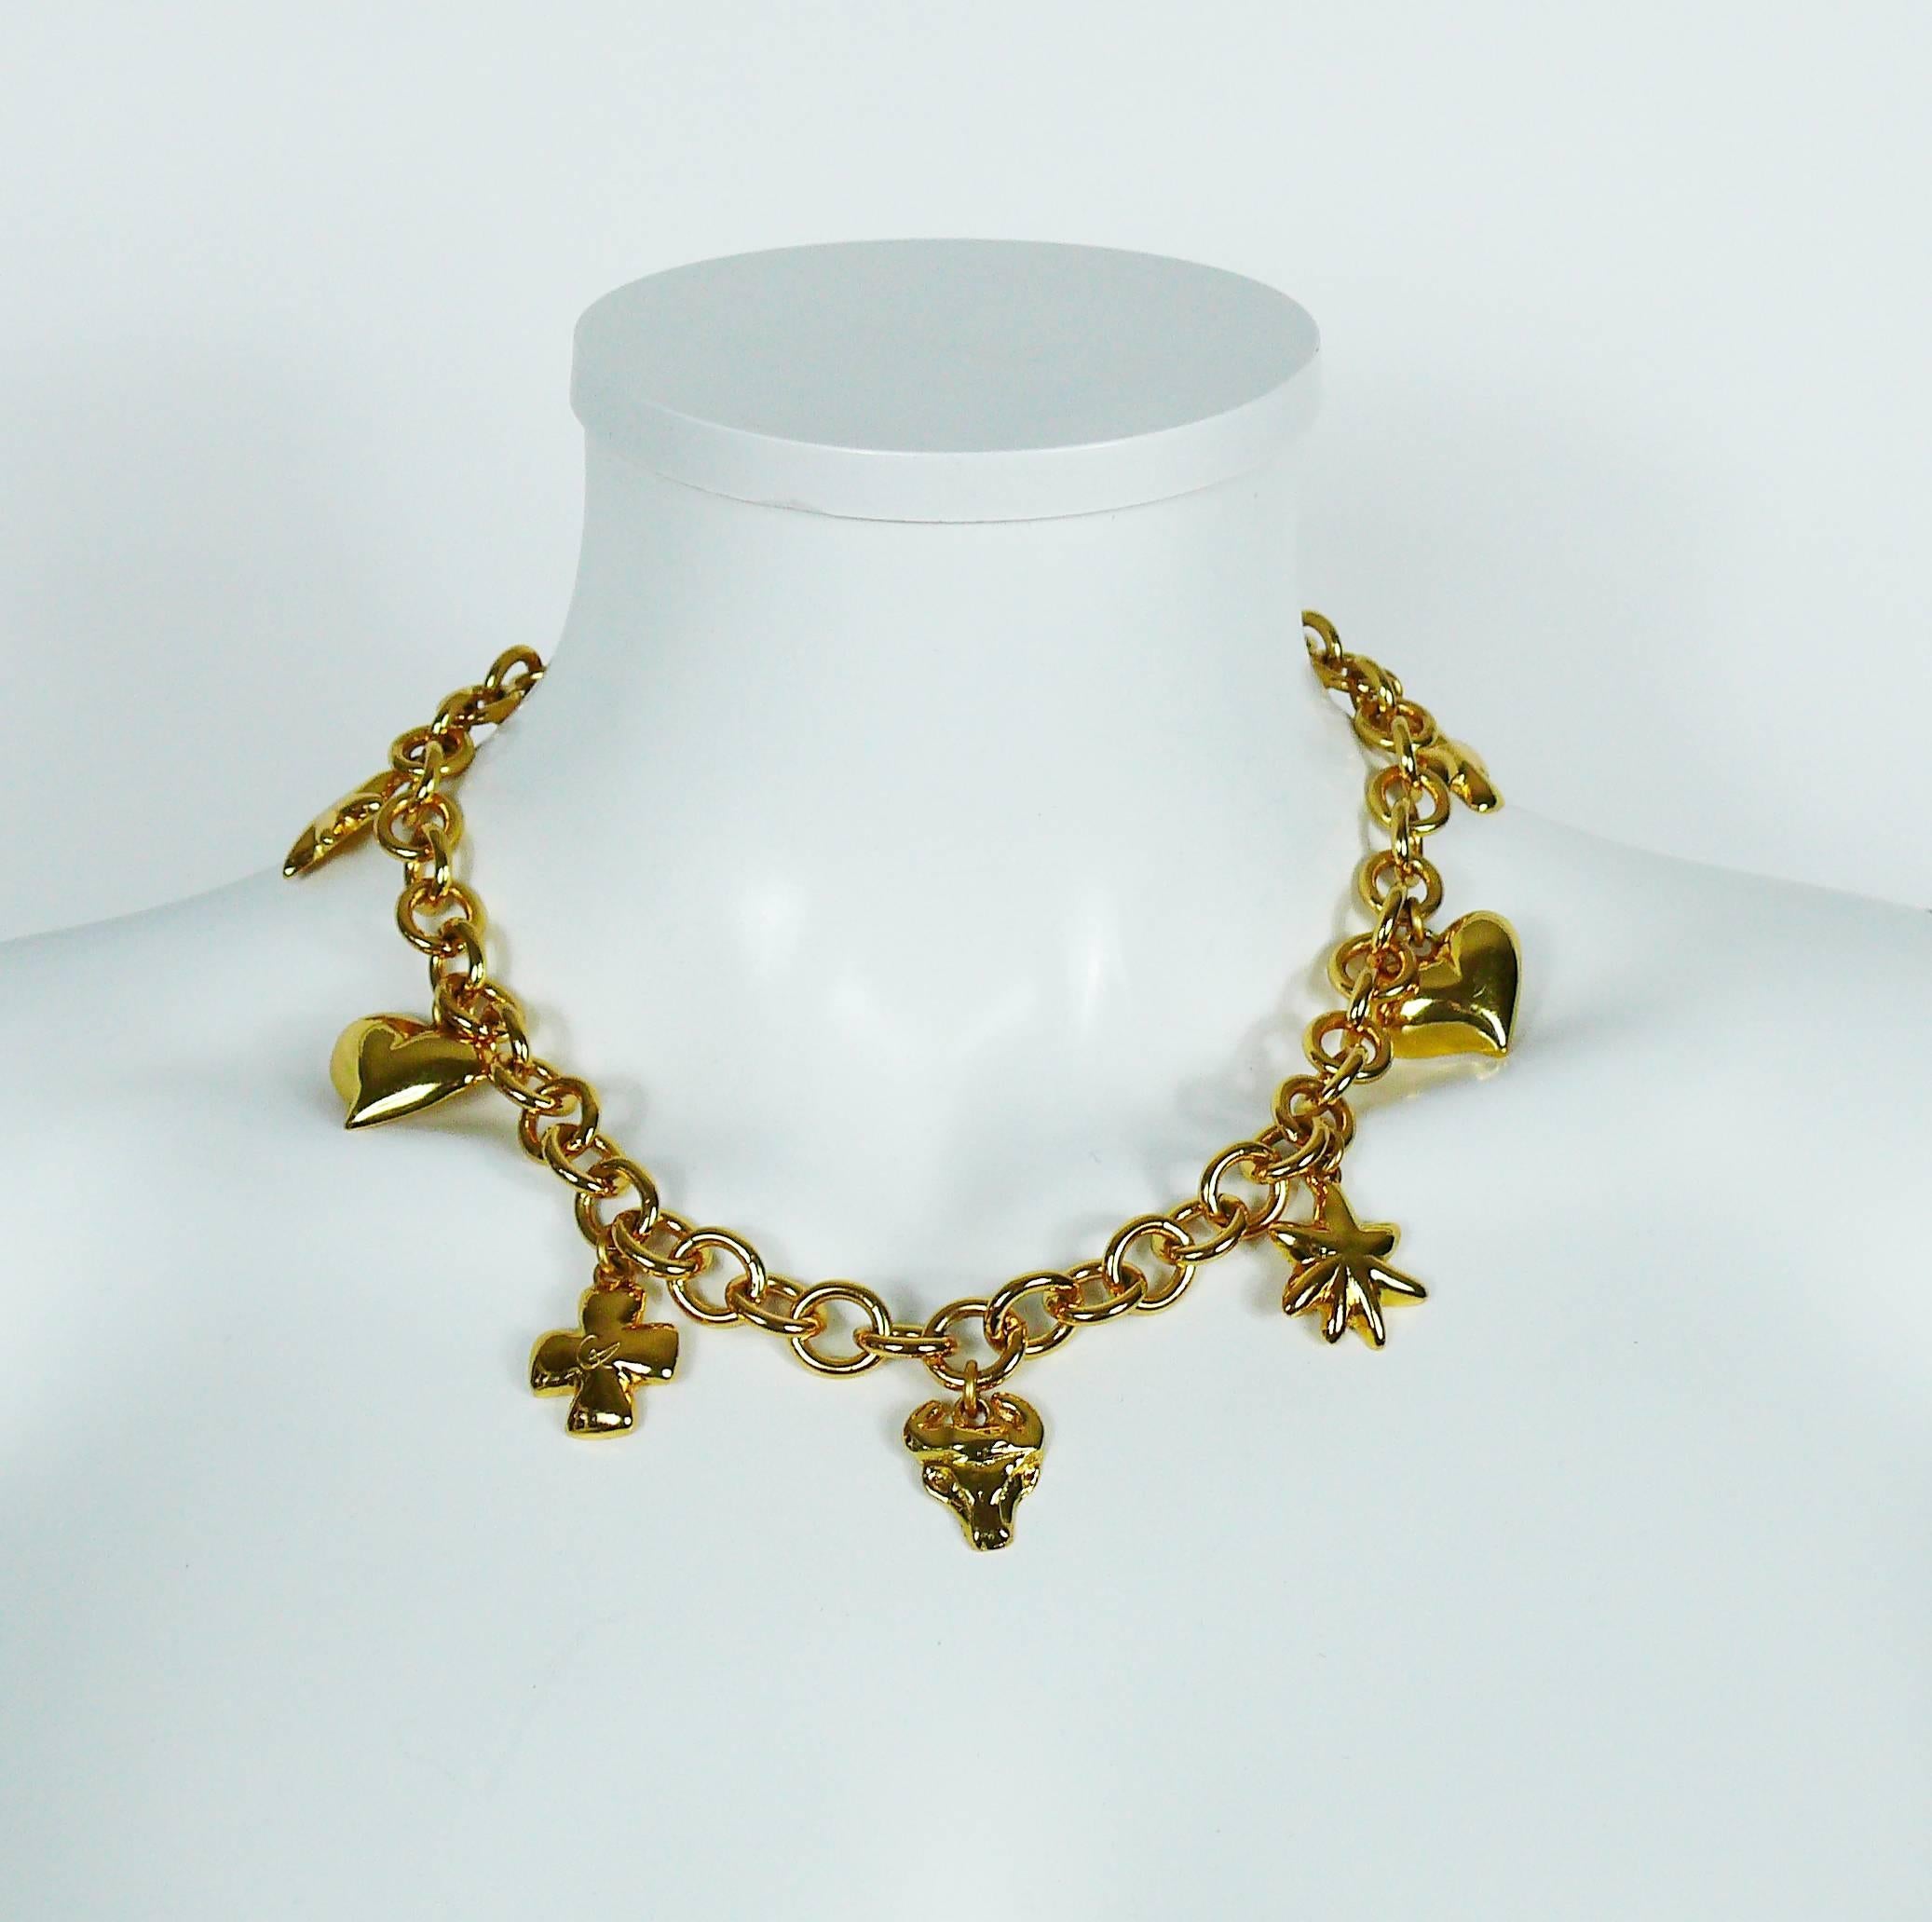 CHRISTIAN LACROIX vintage gold toned necklace featuring a chunky chain embellished with iconic charms : heart, sun, cross and bull head.

T bar and toggle closure.

Marked CHRISTIAN LACROIX CL Made in France.

Indicative measurements : max. length